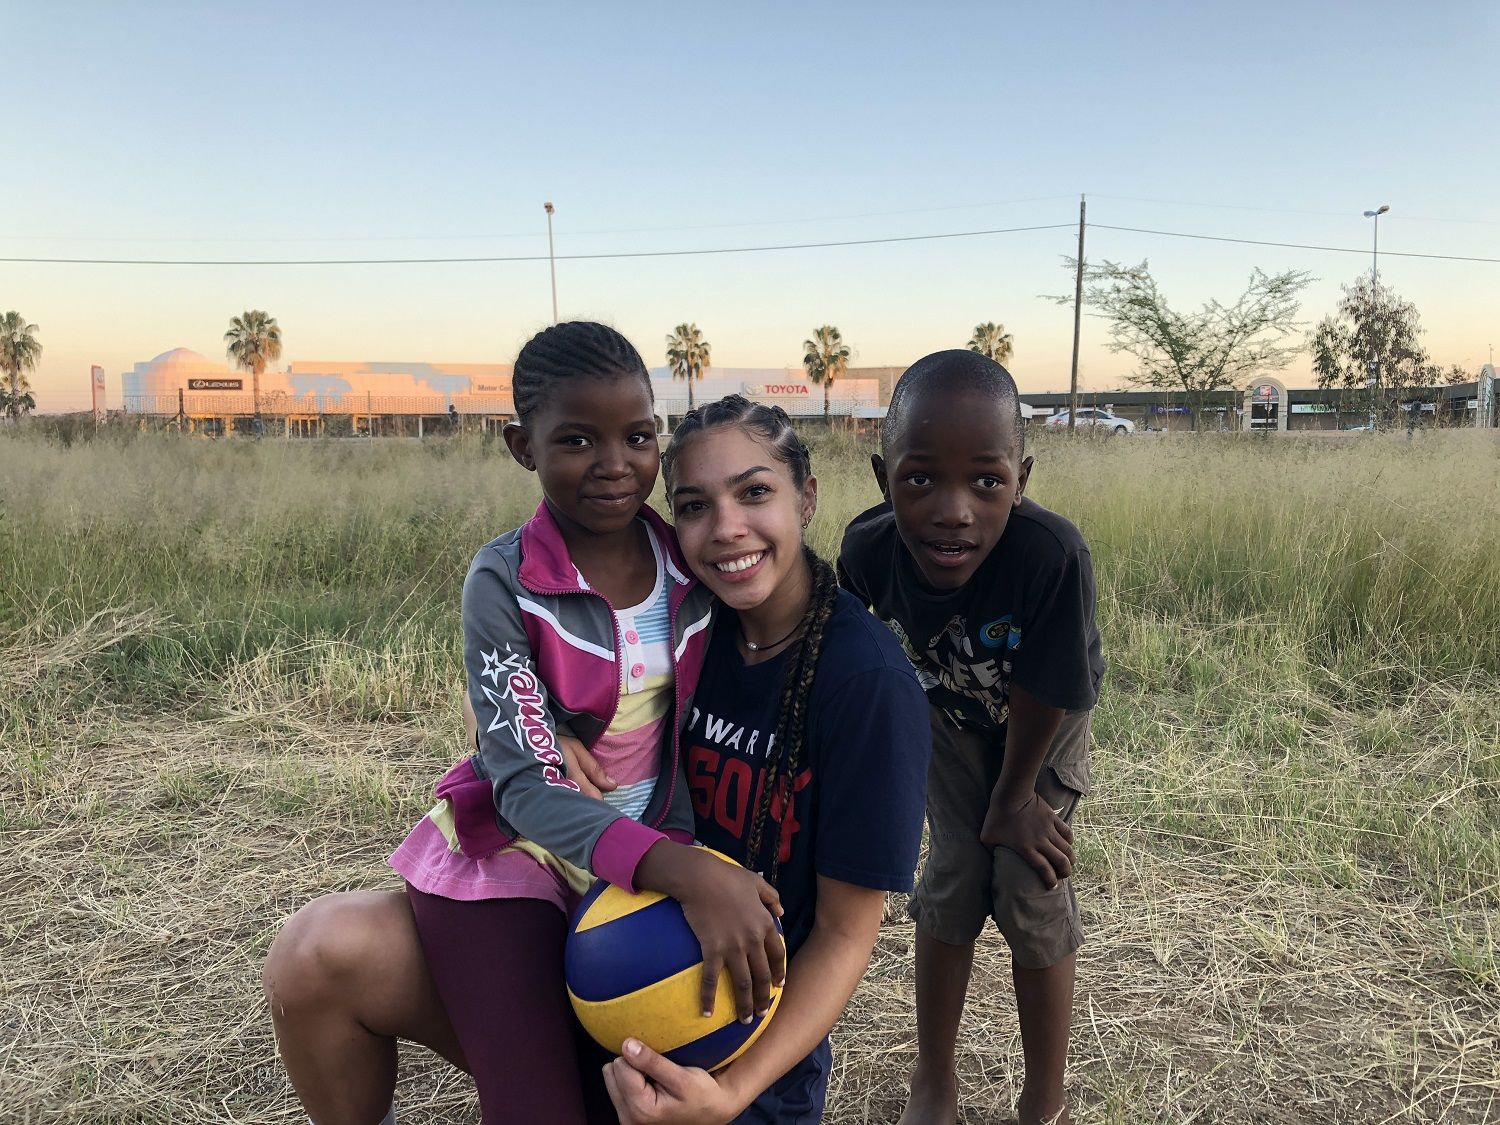 Sophomore libero Abby Morrow poses with some local children on the trip. The team held youth clinics in addition to playing national and local university teams. (Courtesy Howard Athletics)